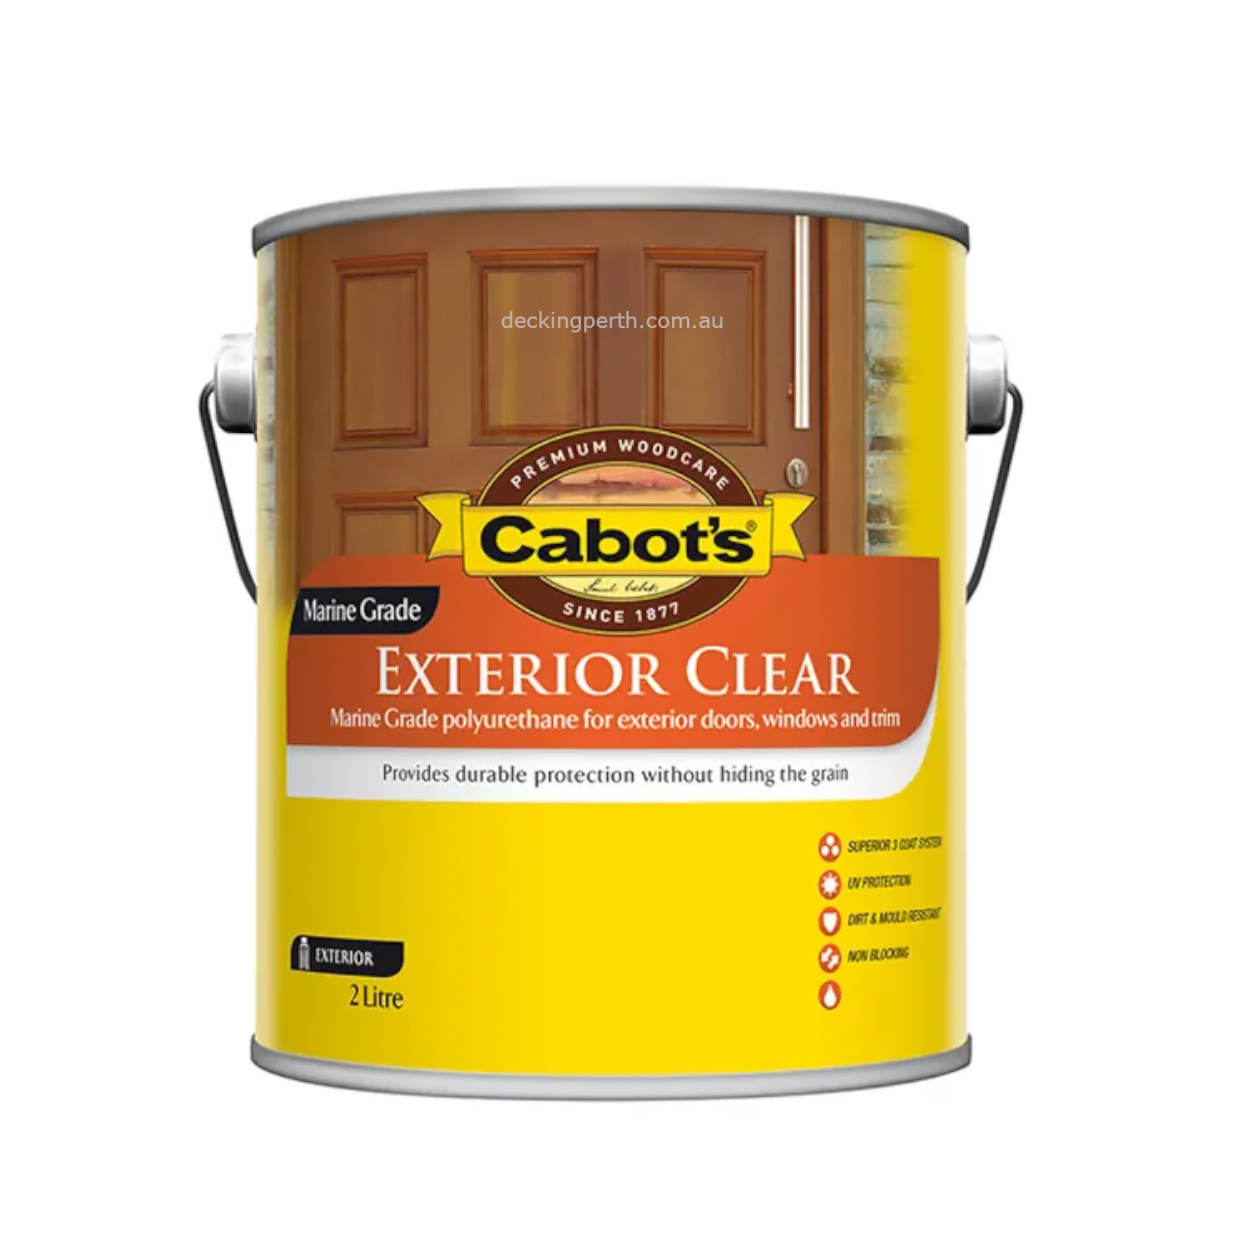 Cabots_Exterior_Clear_Oil_Based_2_litre_Decking_Perth